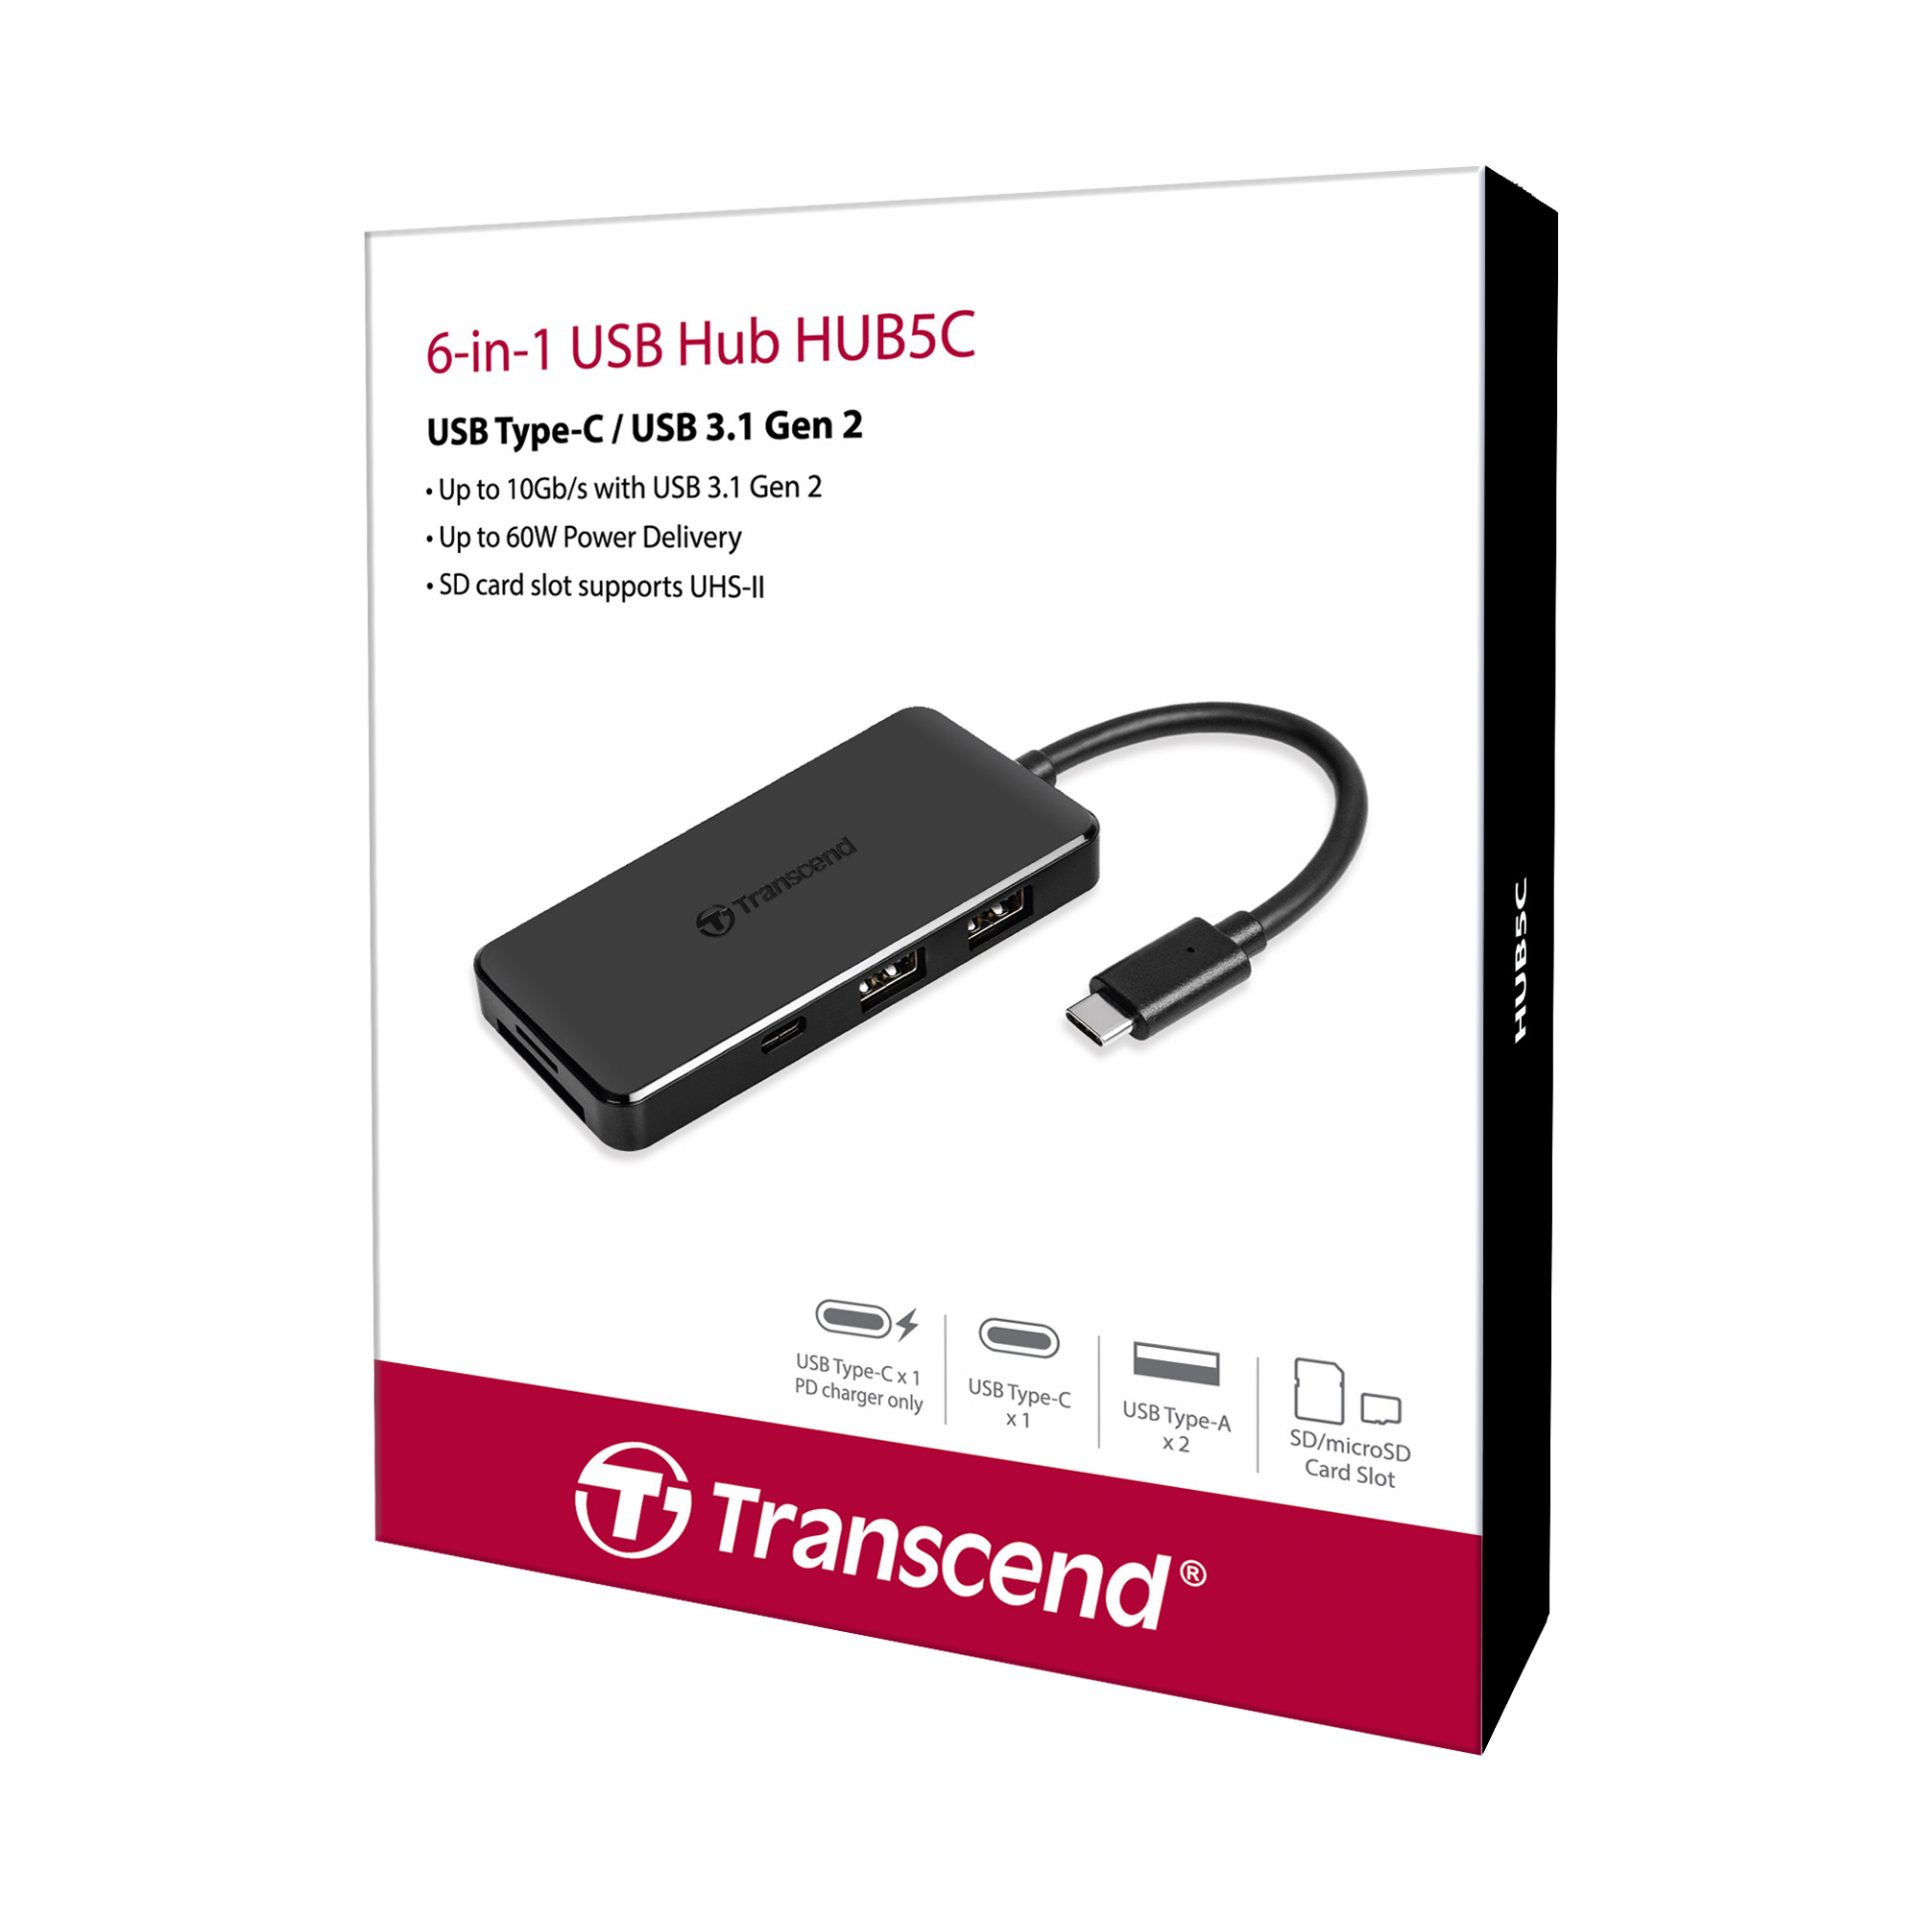 Transcend Releases New USB 3.1 Gen 2 Type-C Hub, with 10Gb/s Transfer  Capability, 60W Power Delivery, UHS-II SD Card Reader, and More - The Tech  Revolutionist